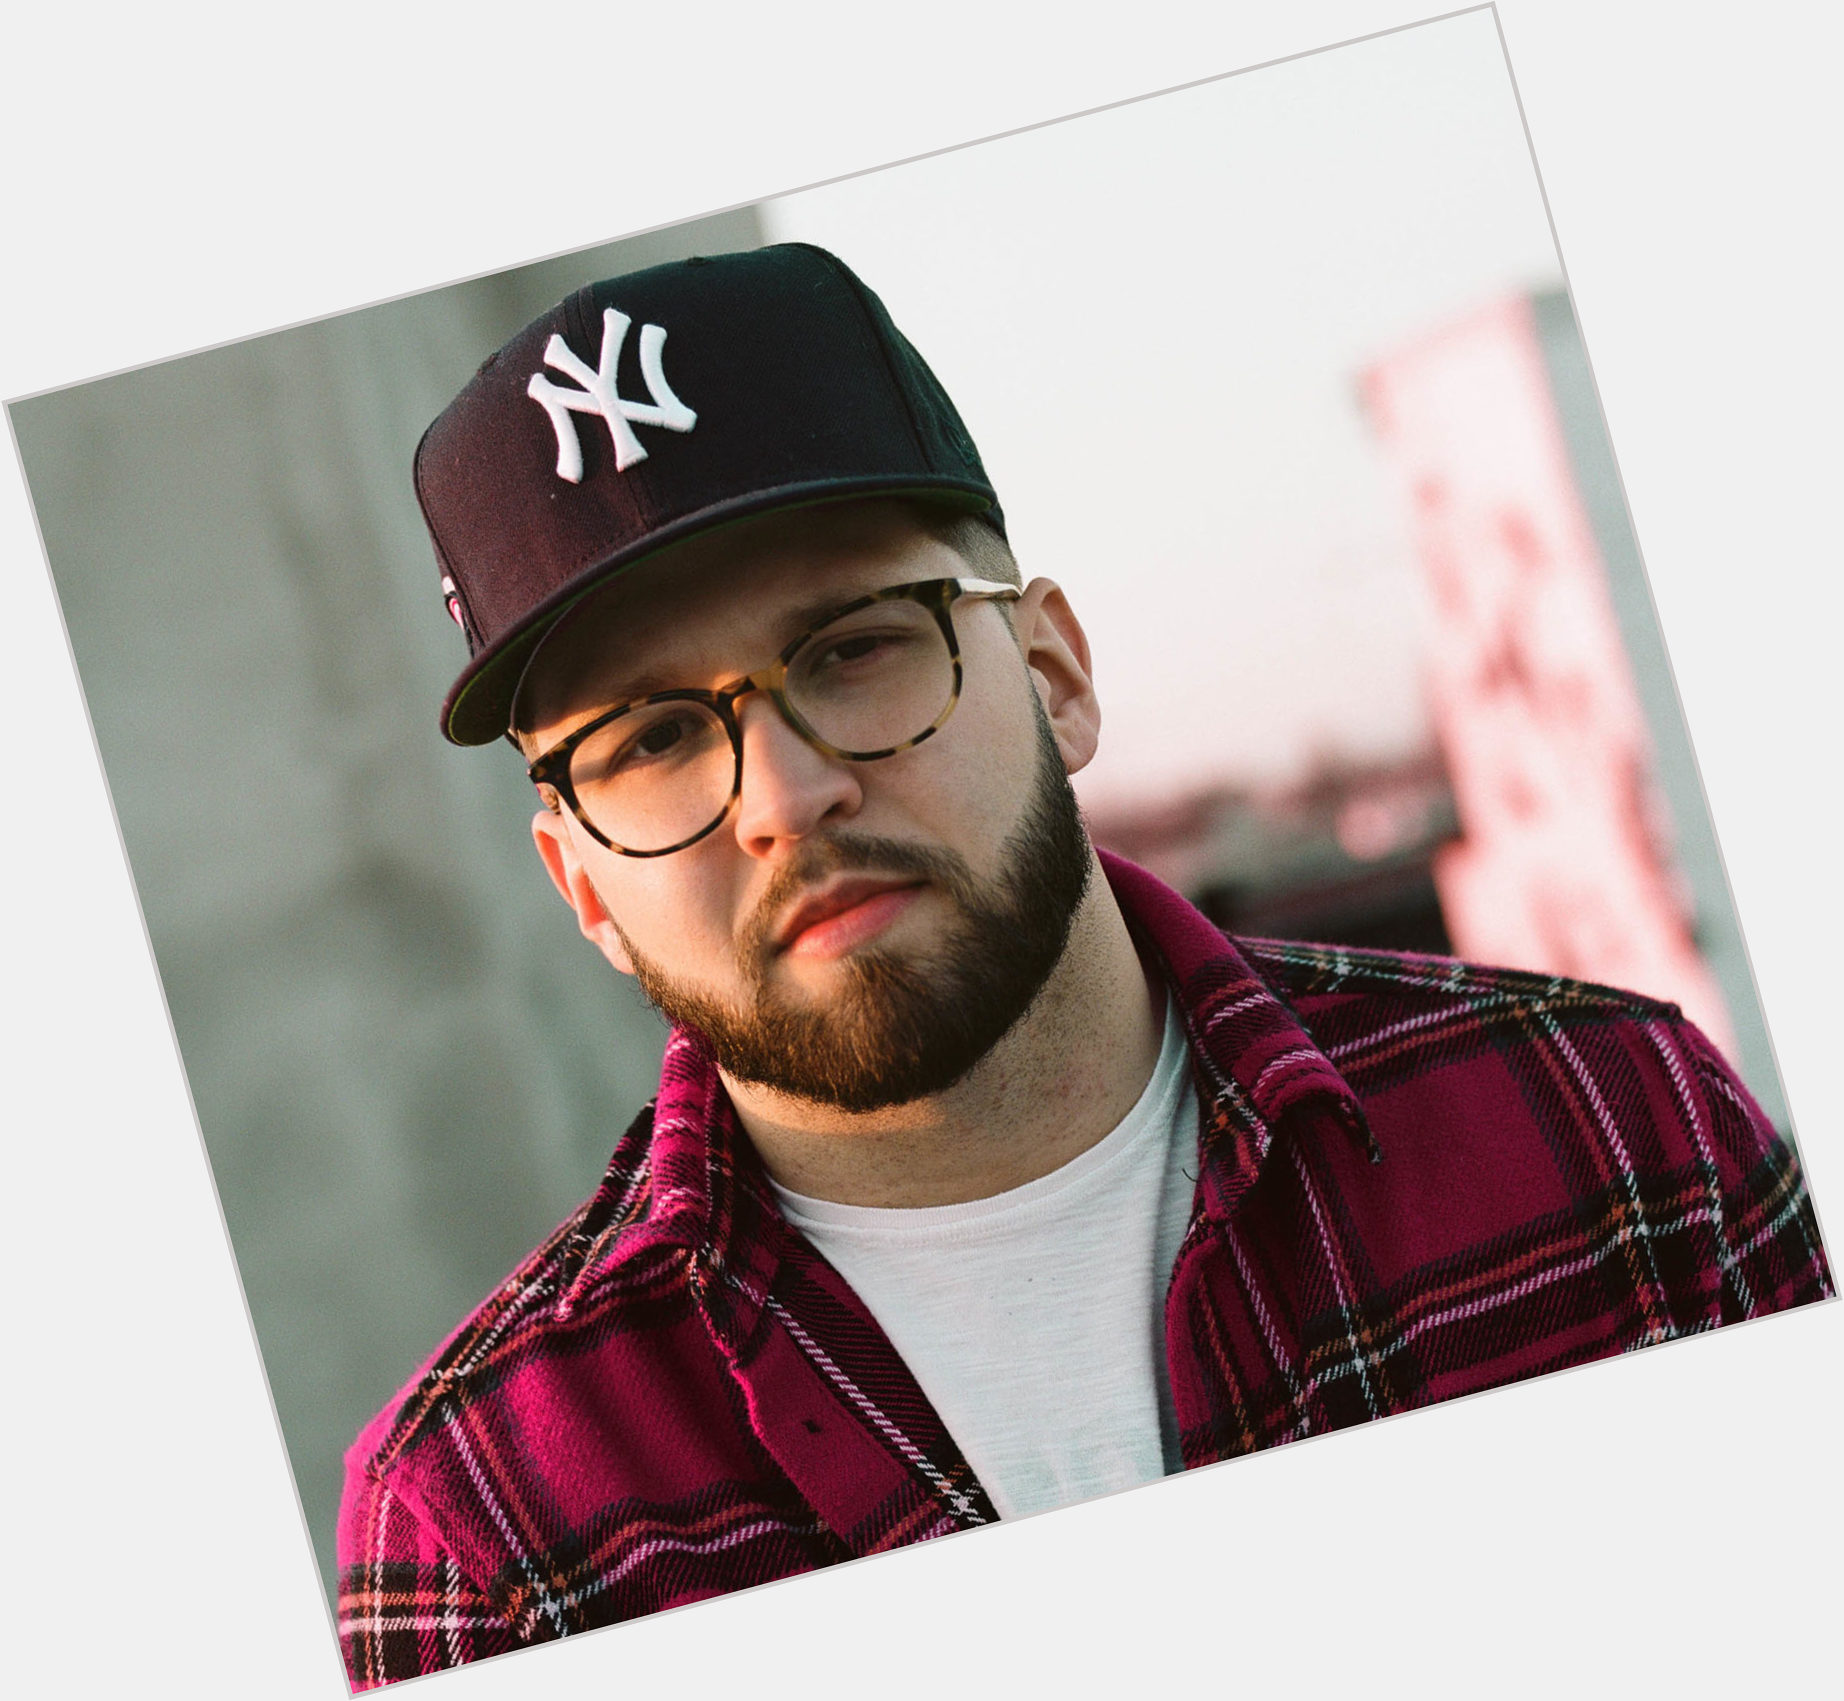 Https://fanpagepress.net/m/A/Andy Mineo Dating 2